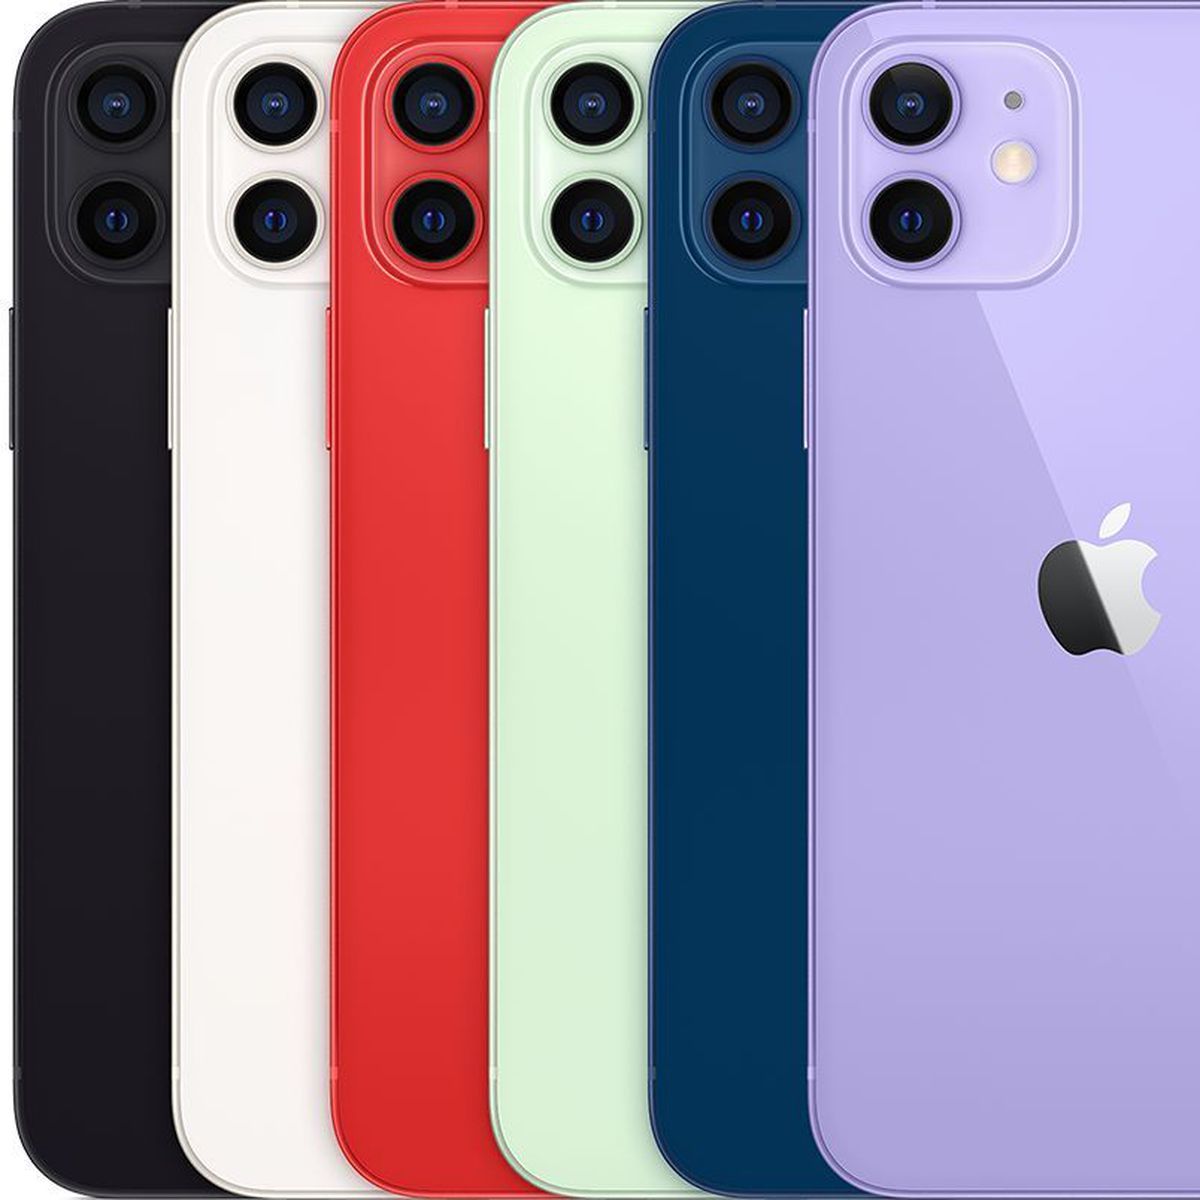 iPhone 12 Colors: Deciding on the Right Color - MacRumors